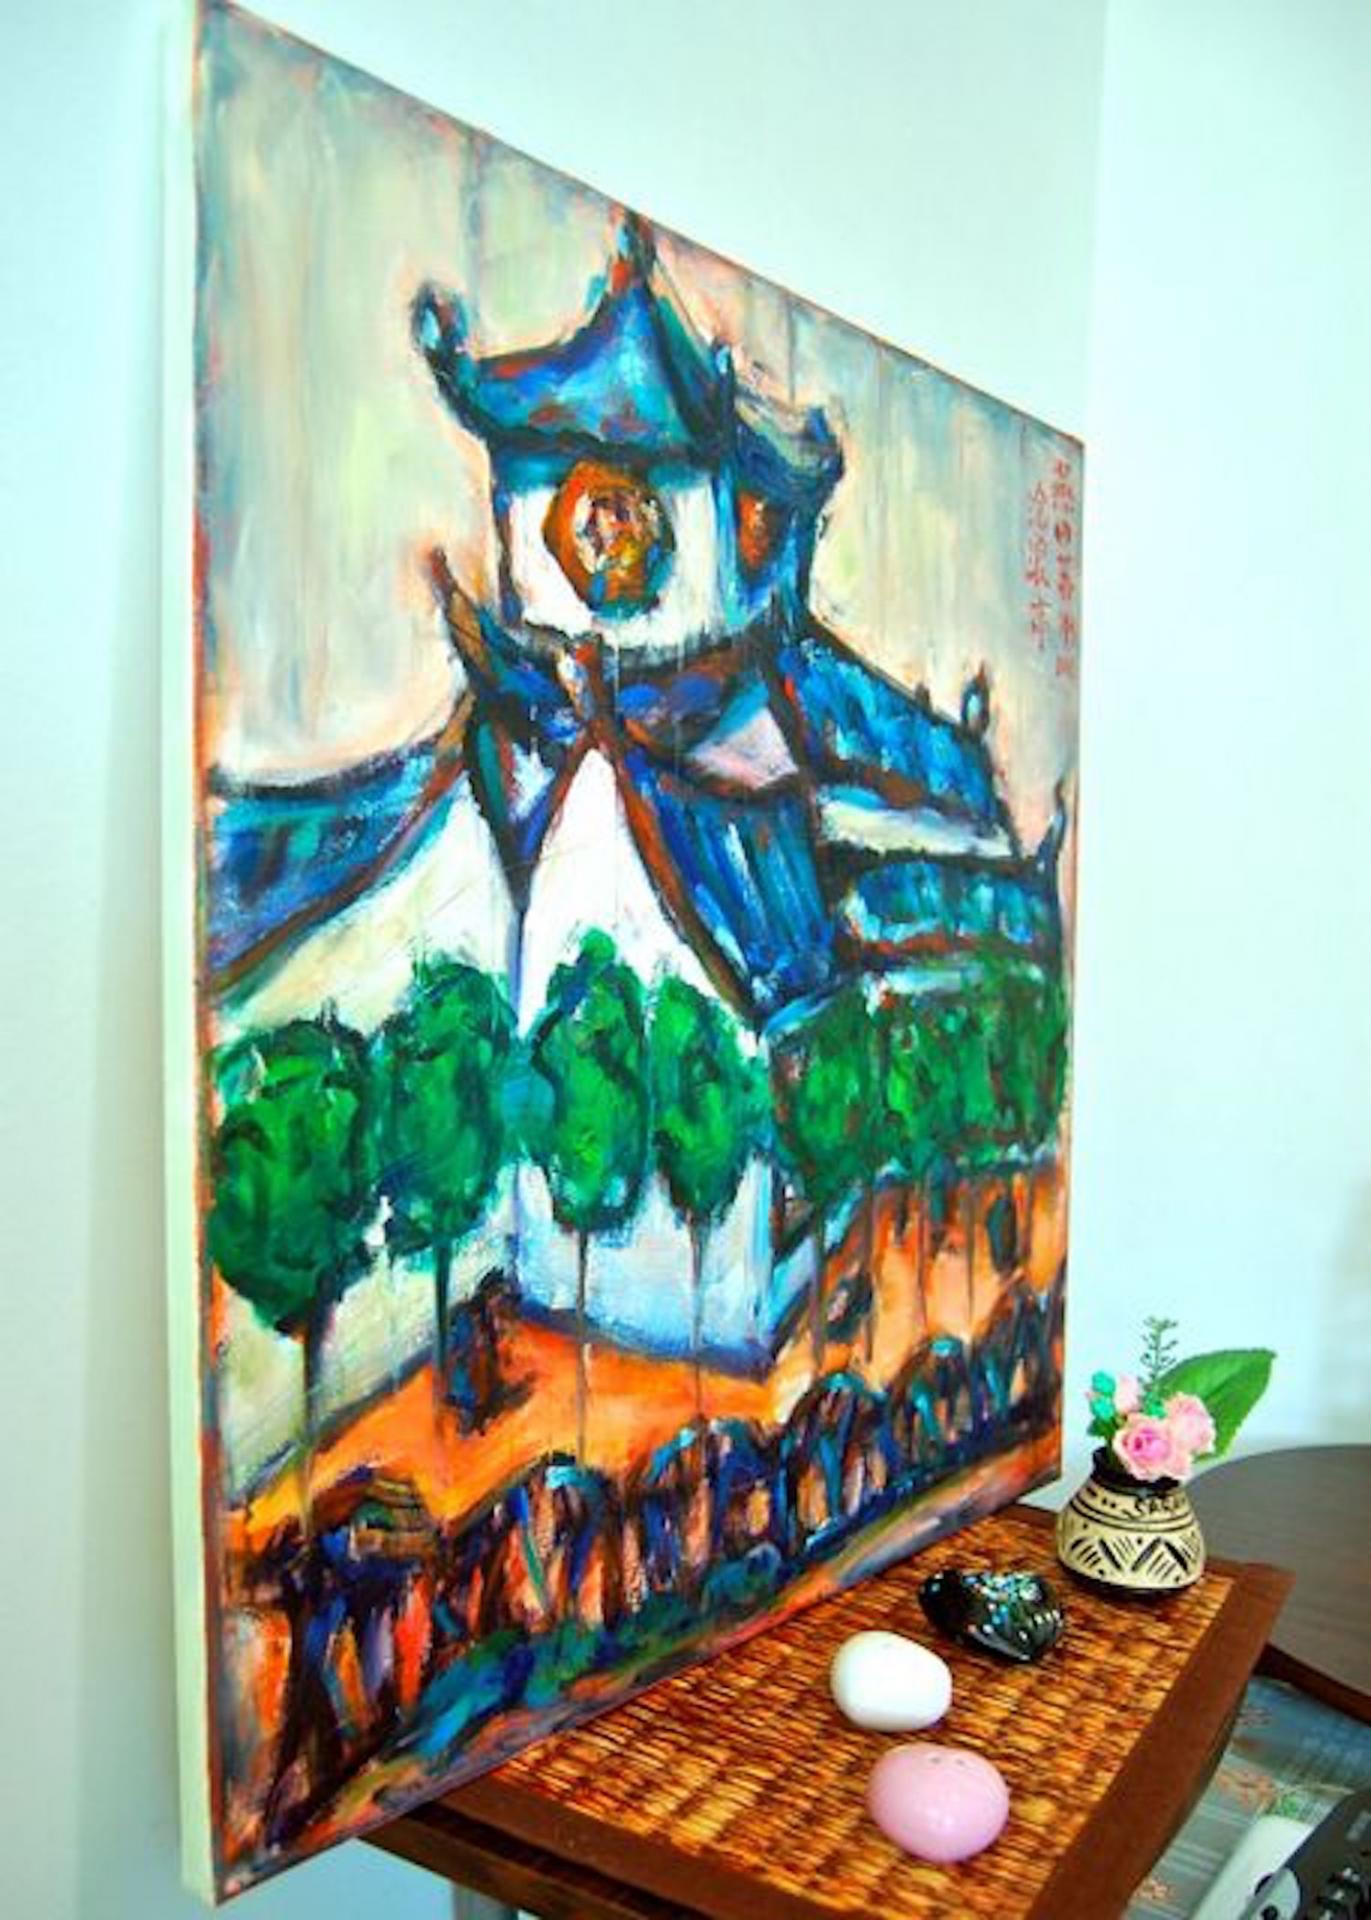 Suzhou Gardens - Chinese Painting, Zen House, Whimsical Art, Original Oil Painting, Impressionist, China Architecture, Classical, Asian Art